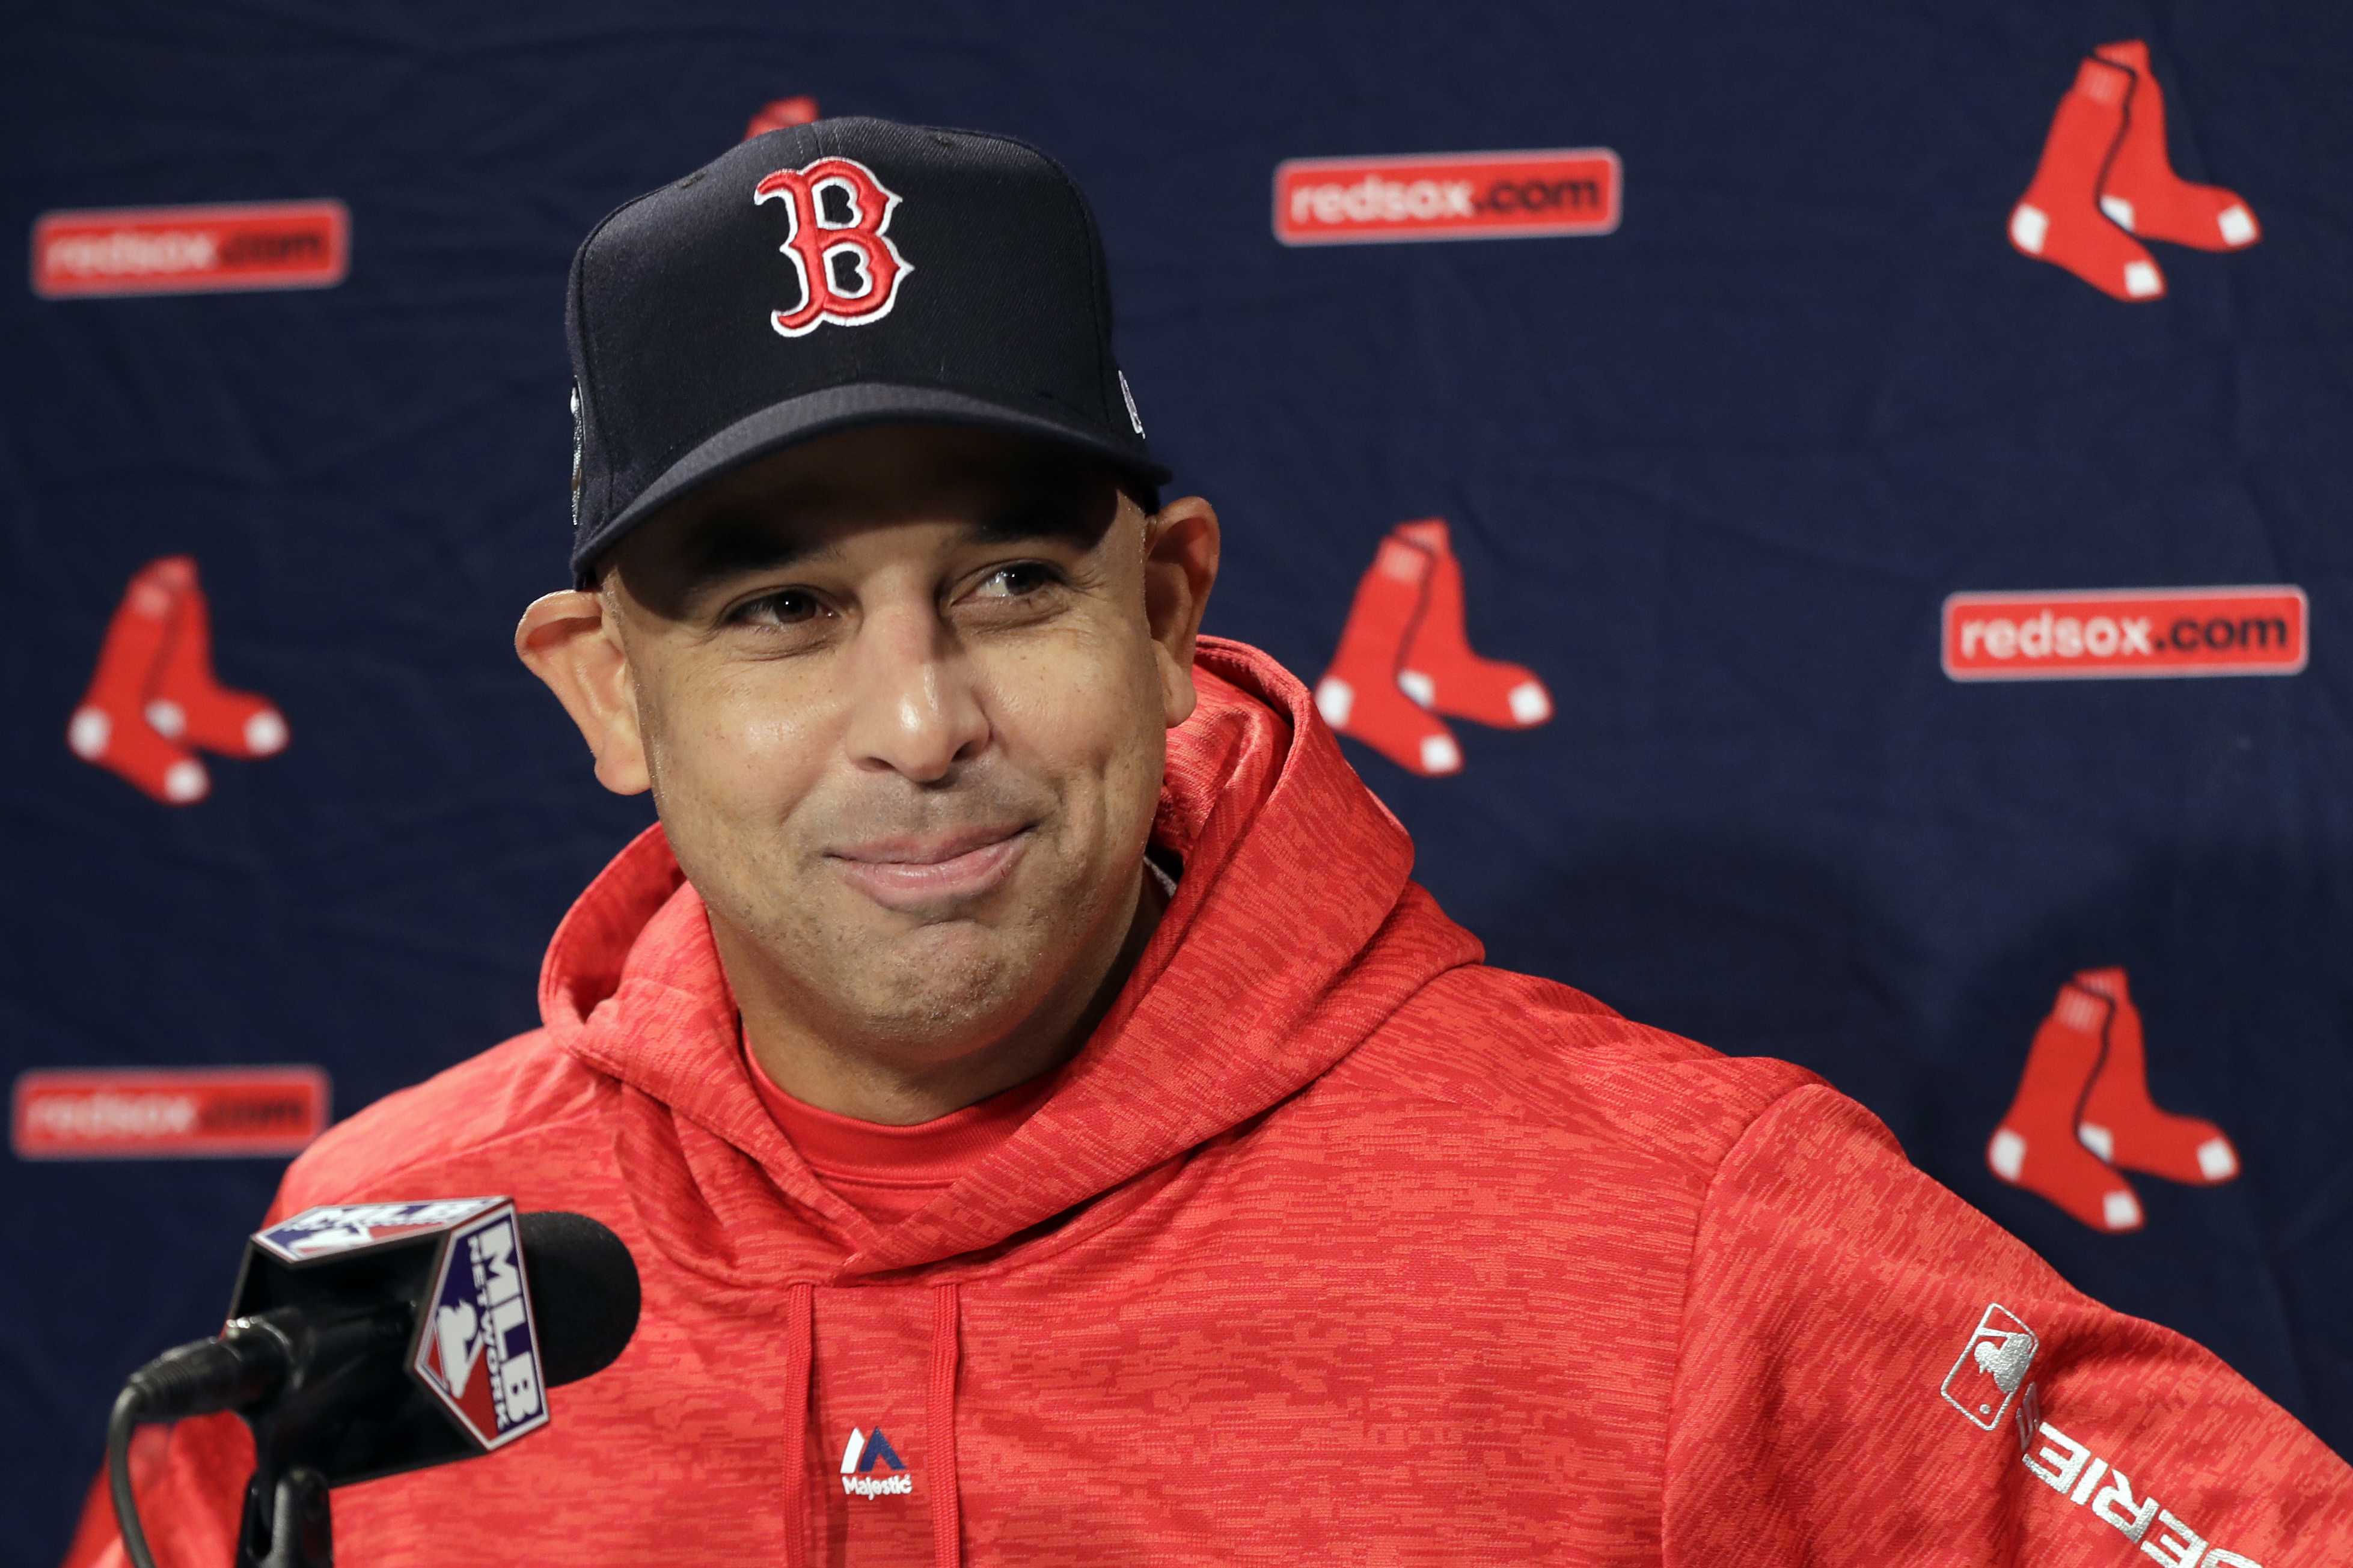 Red Sox to hire Alex Cora as manager, pre reports